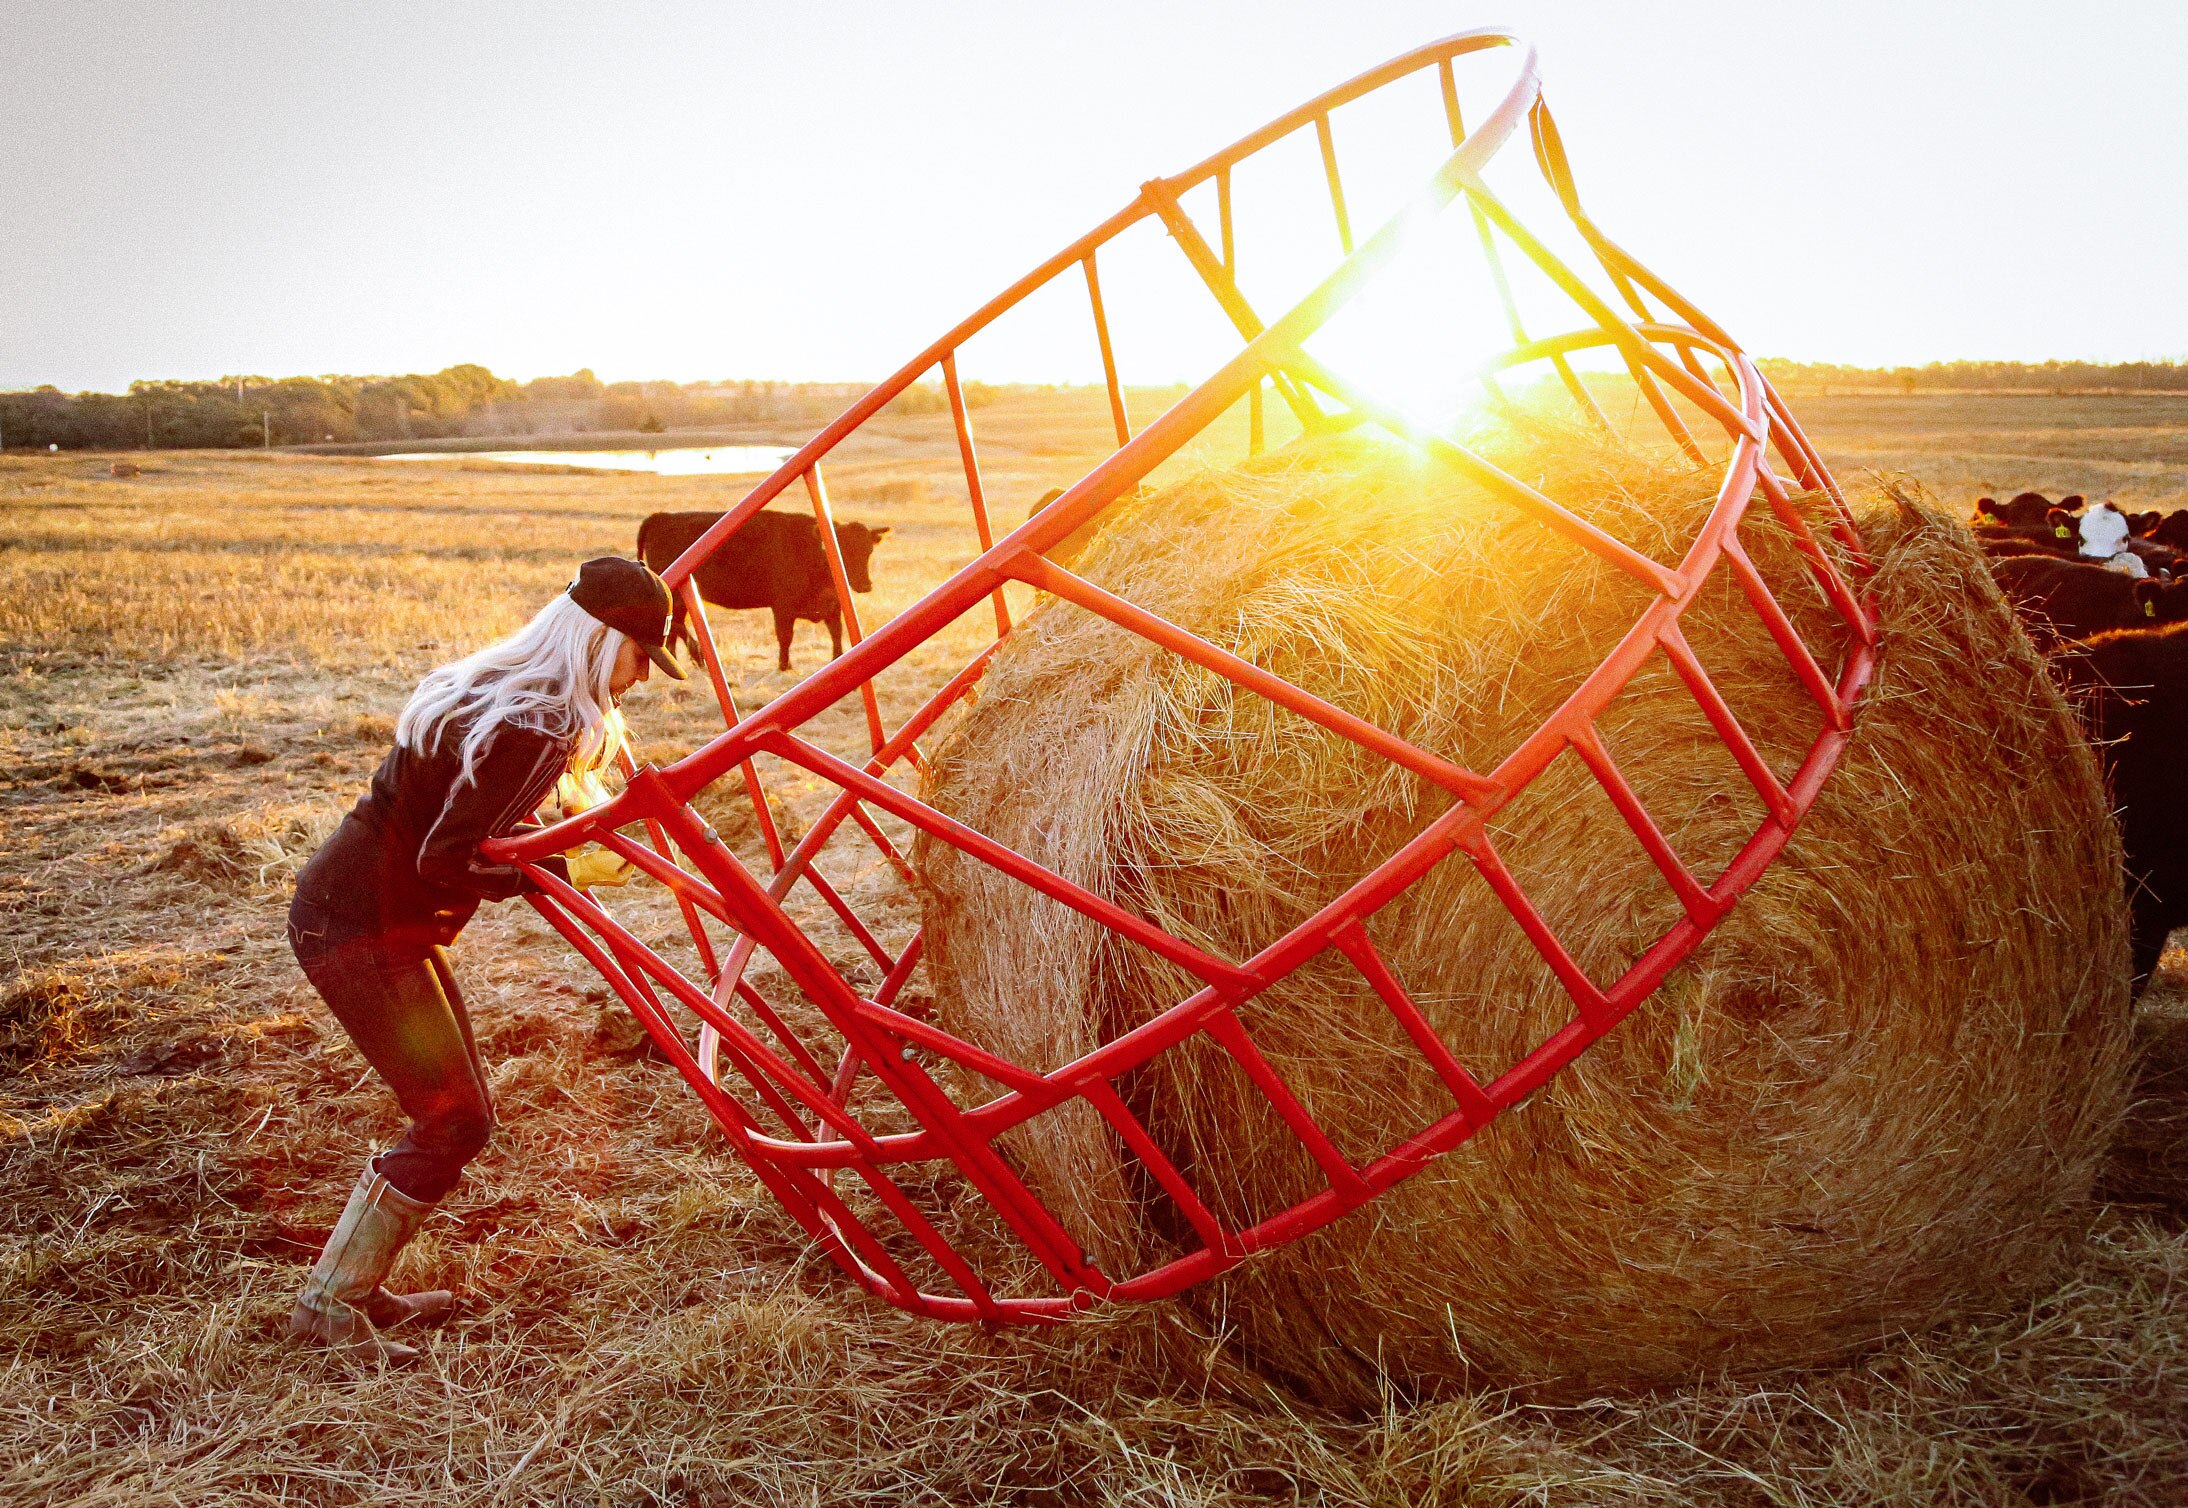 A woman working with a hay bale